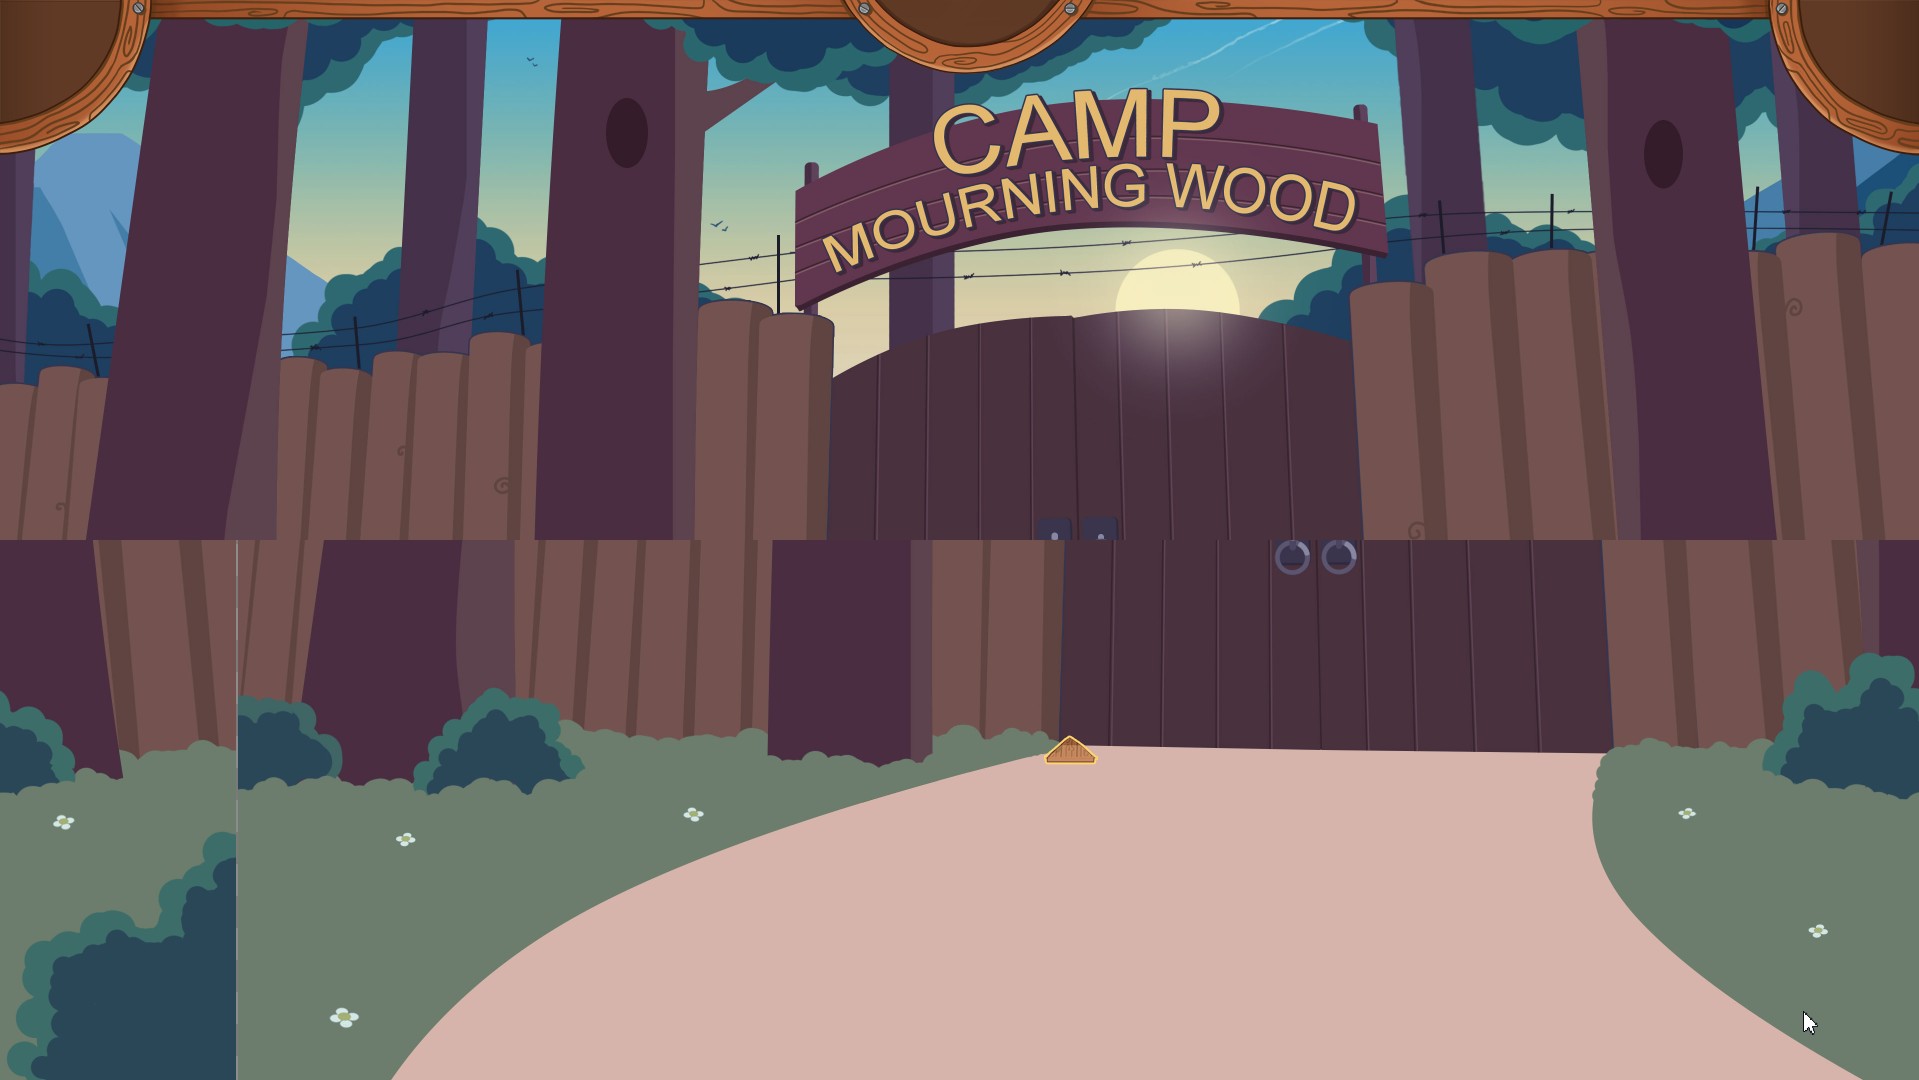 Camp mourning wood